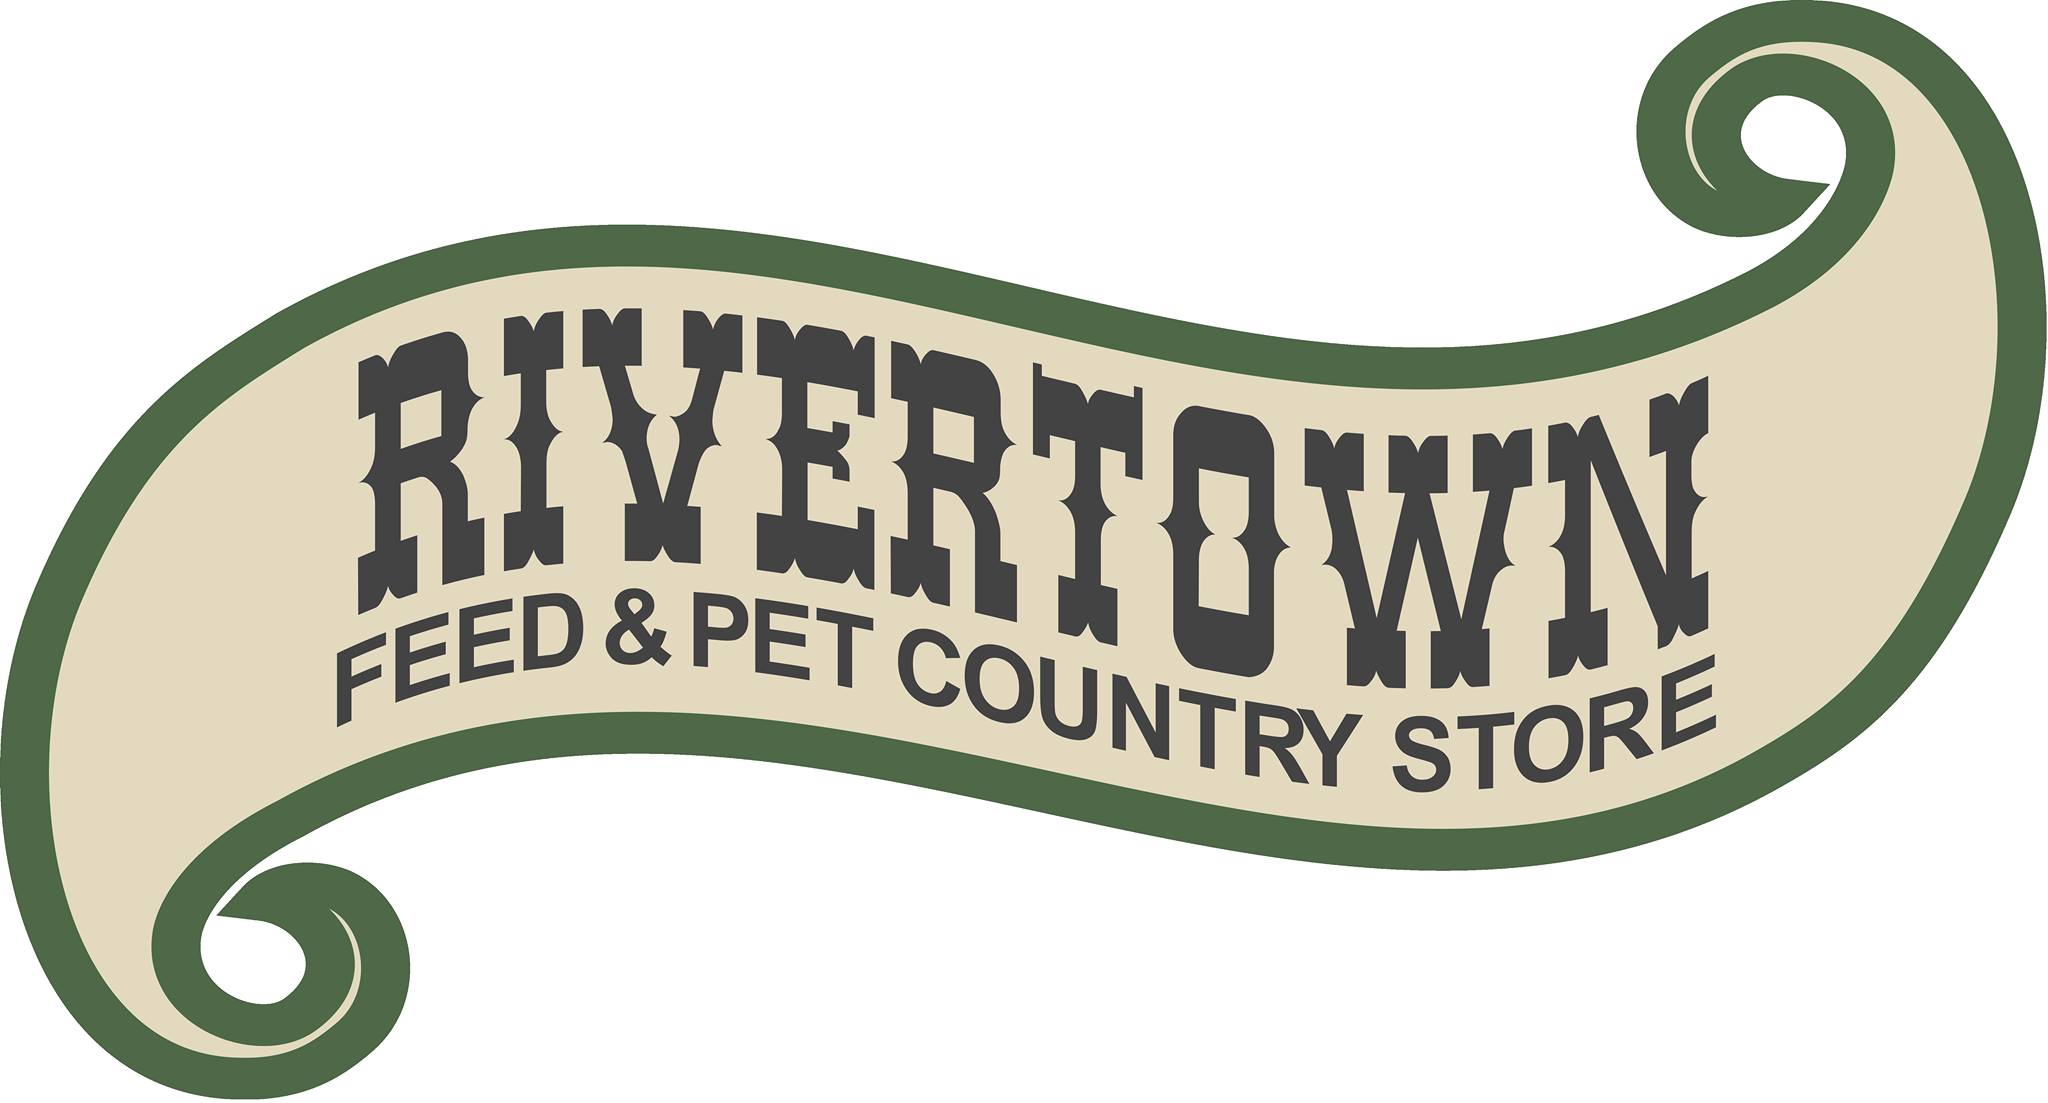 Company logo of Rivertown Feed & Pet Country Store